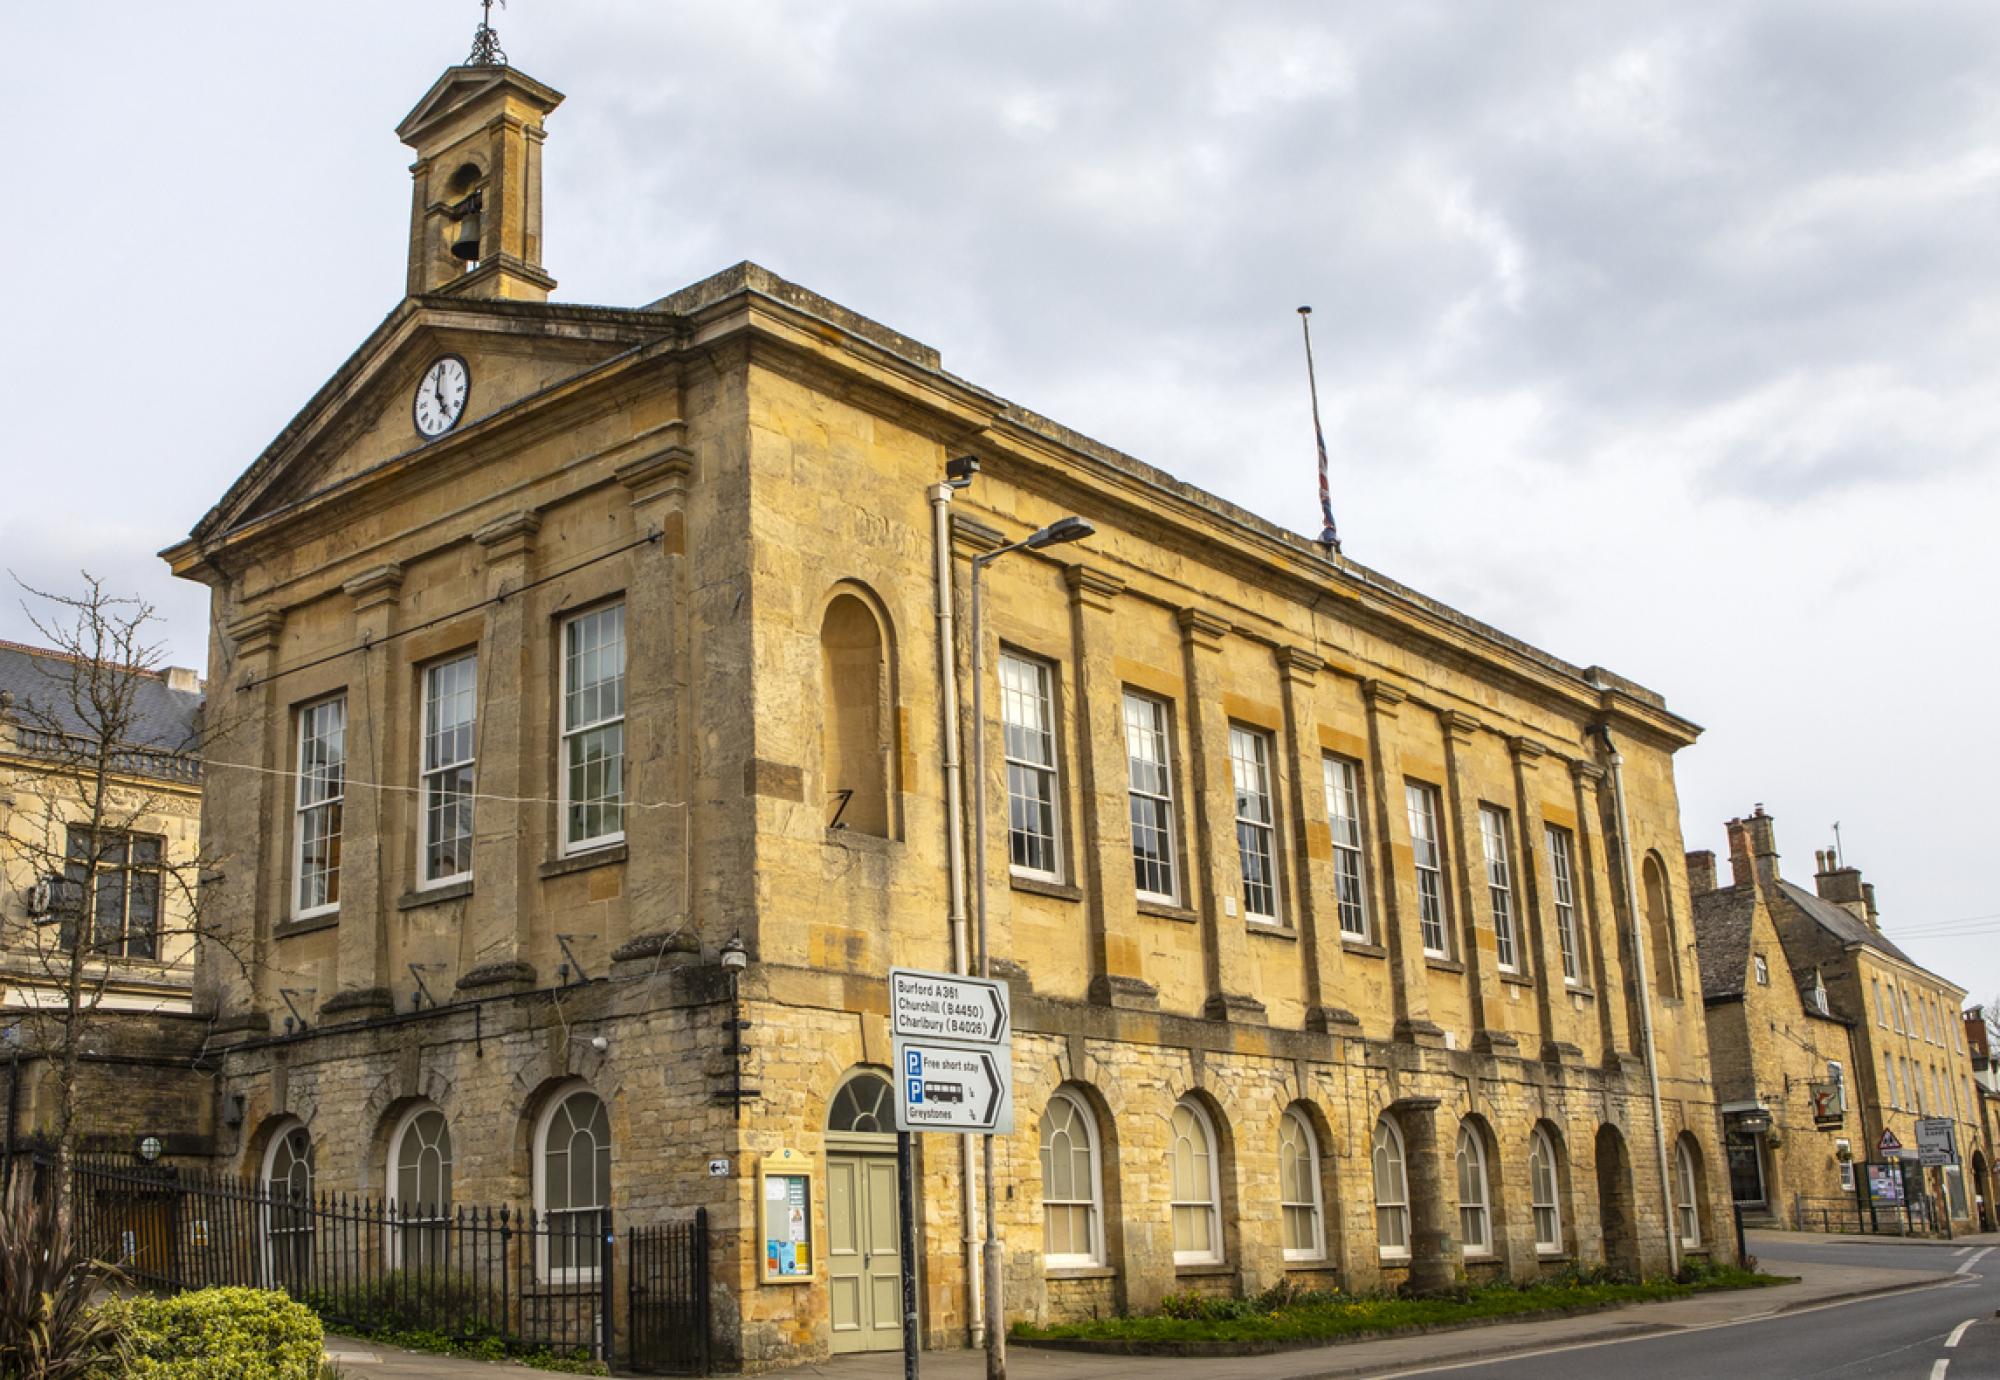 Town hall in Chipping Norton, West Oxfordshire